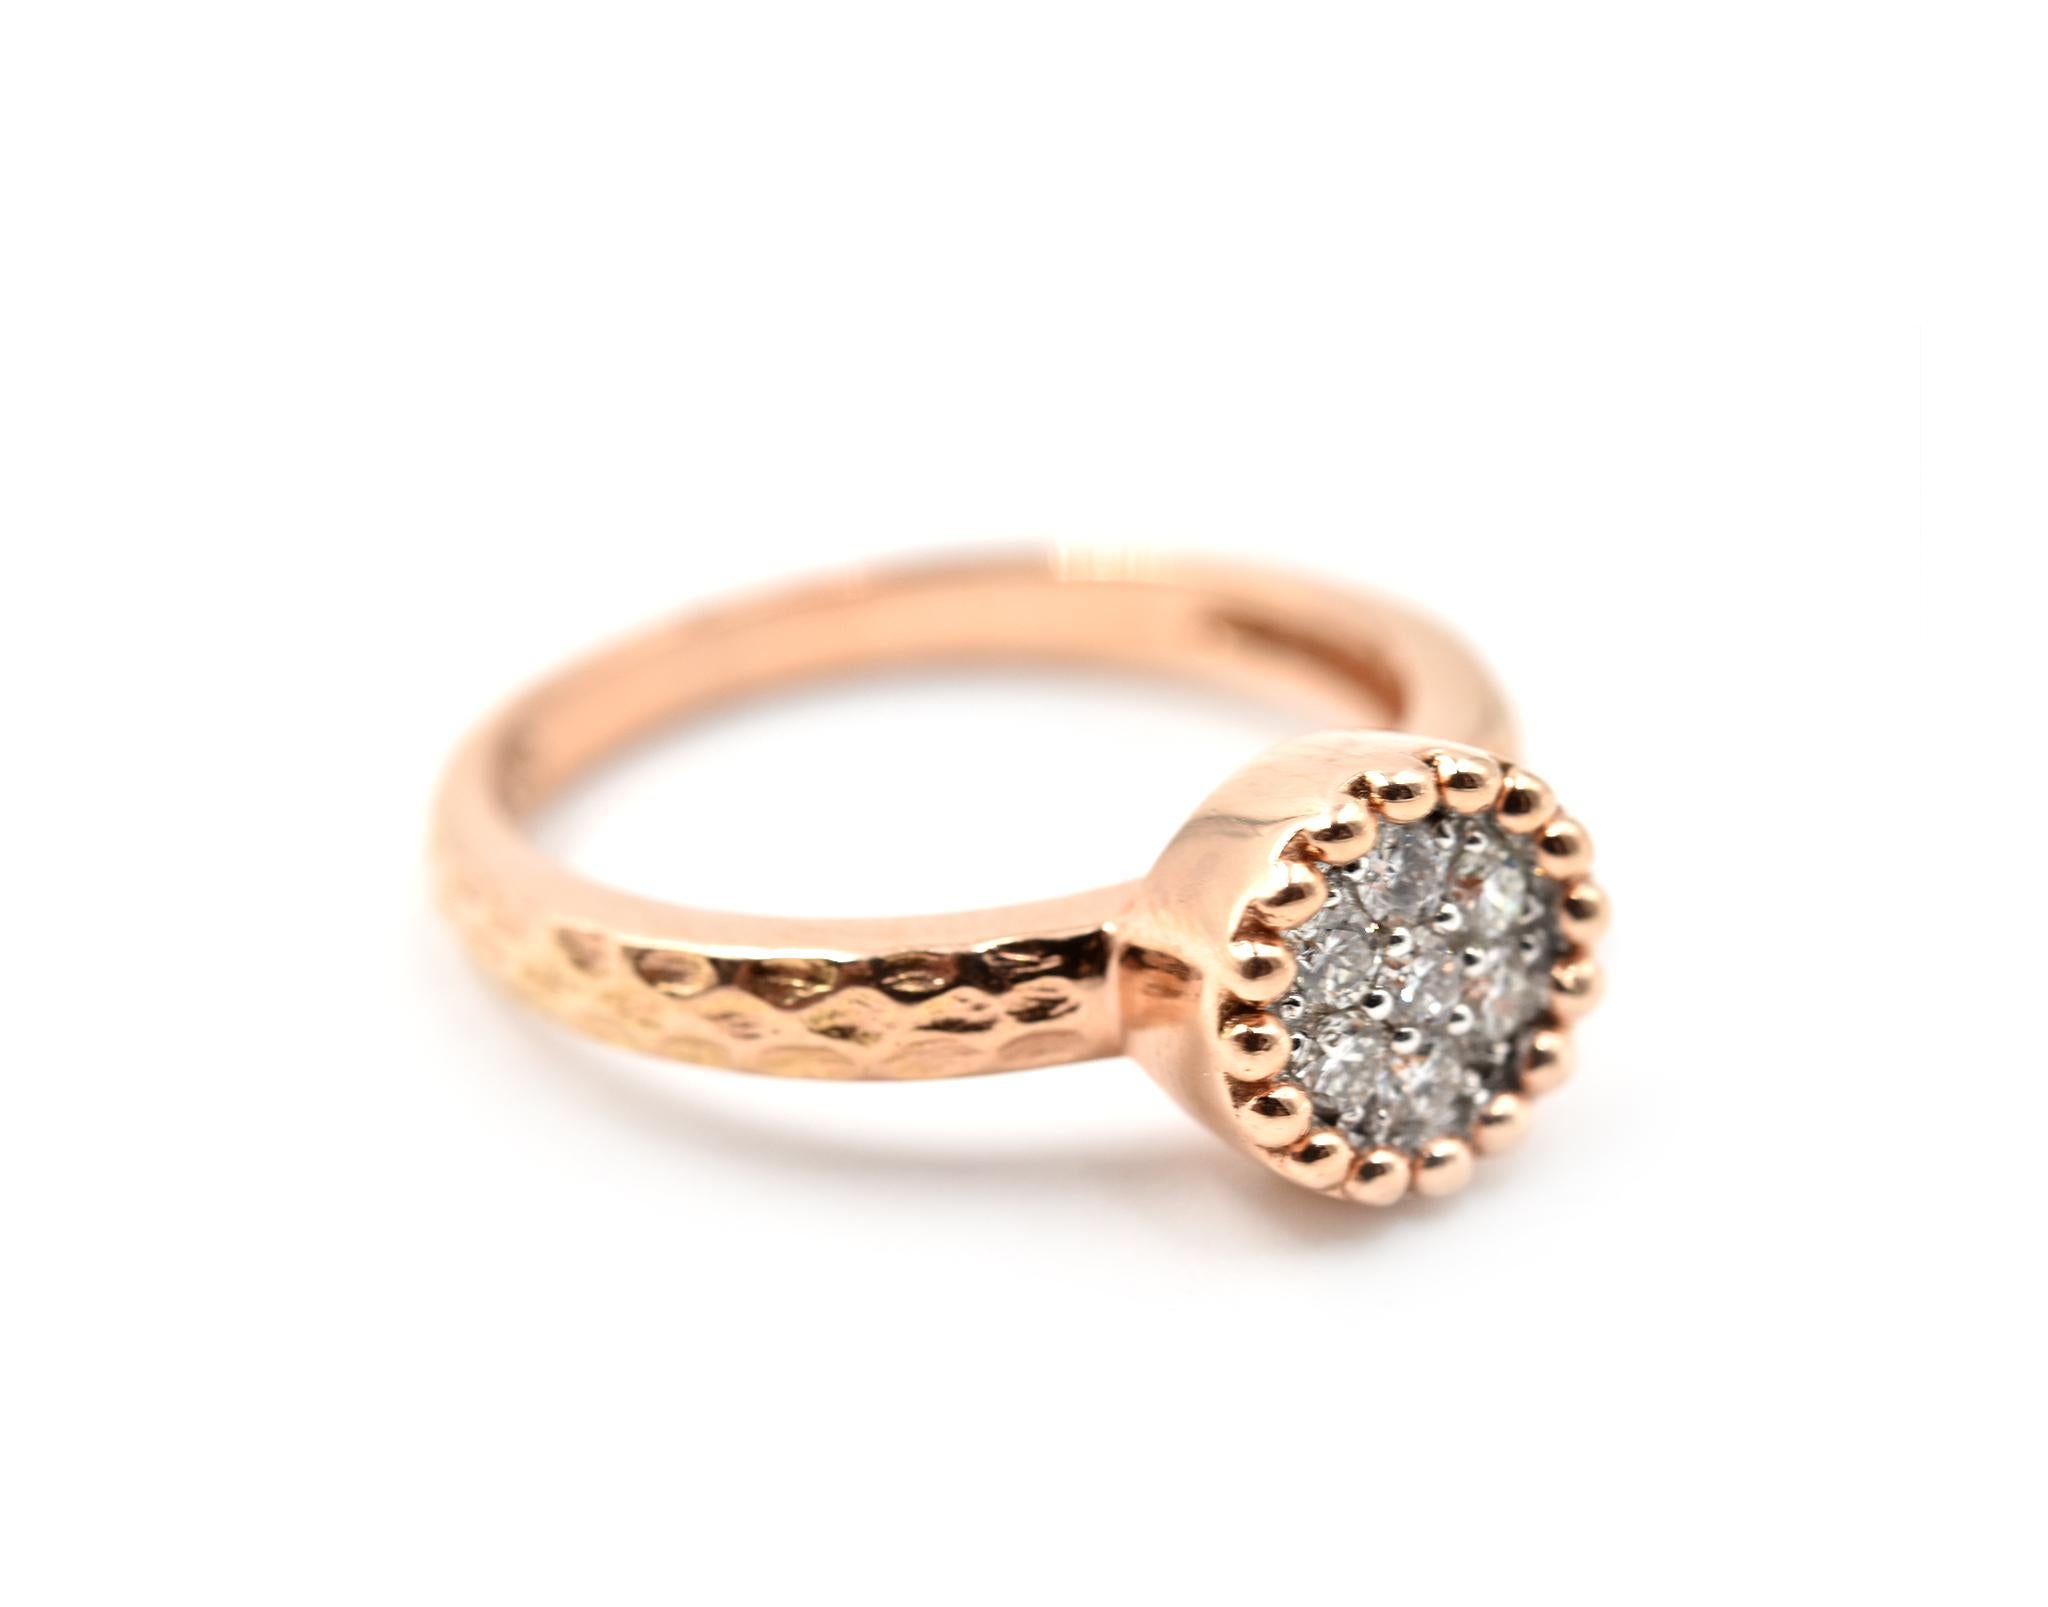 Designer: custom design
Material: 14k rose gold
Diamonds: seven round brilliant cuts = 0.20 carat weight
Color: H
Clarity: VS2-SI1
Ring Size: 7 (please allow two additional shipping days for sizing requests)
Weight: 3.8 grams

